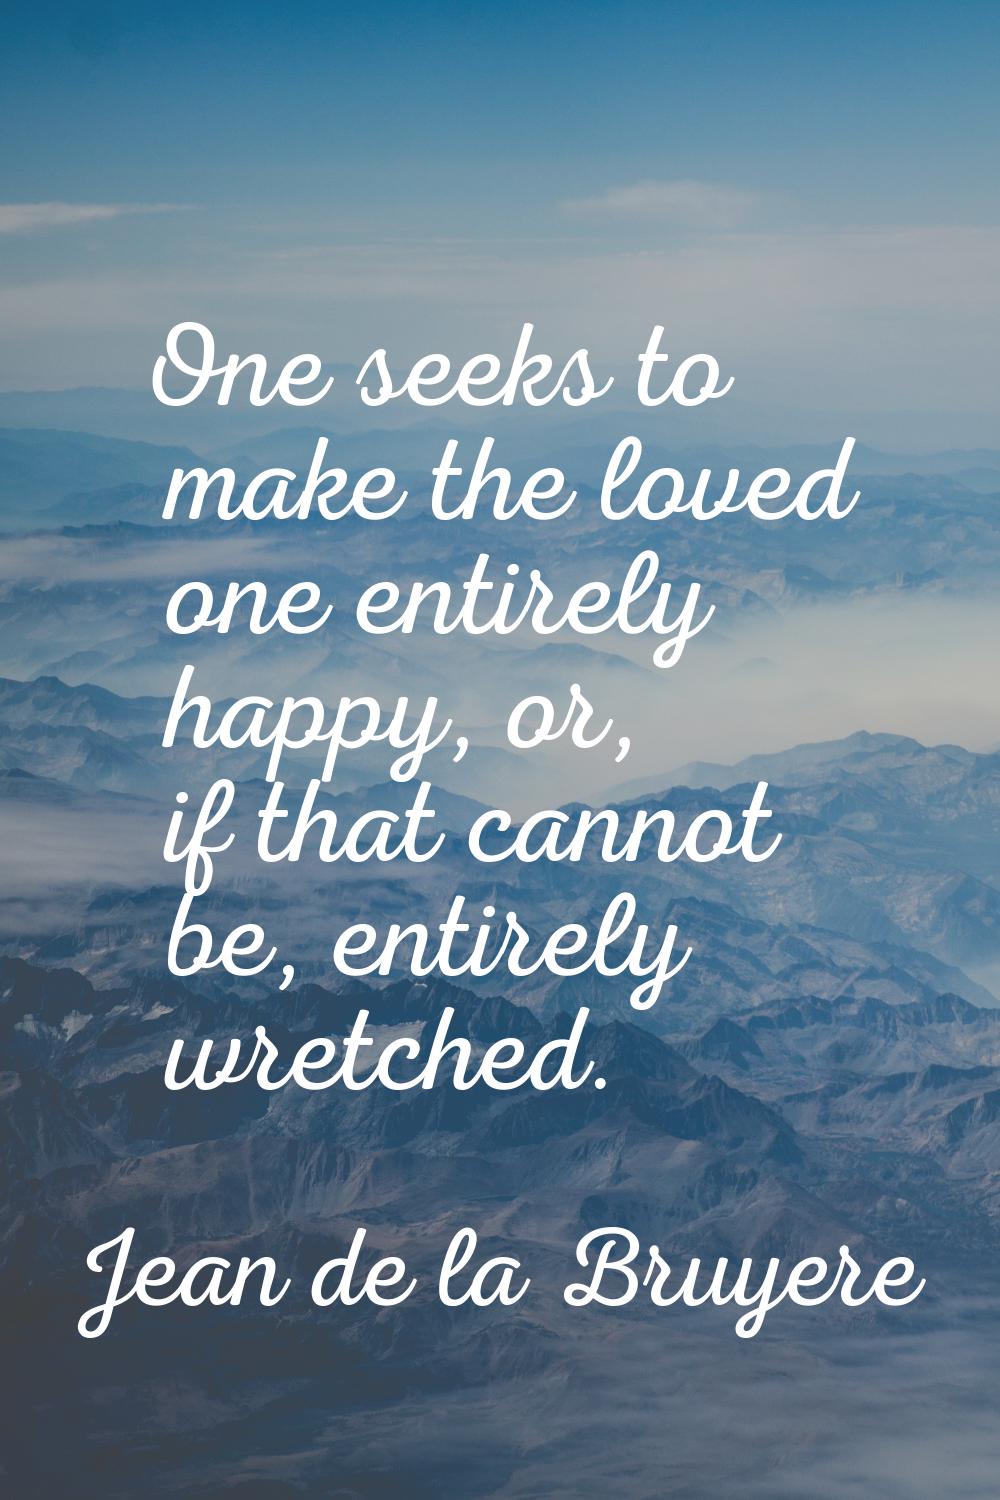 One seeks to make the loved one entirely happy, or, if that cannot be, entirely wretched.